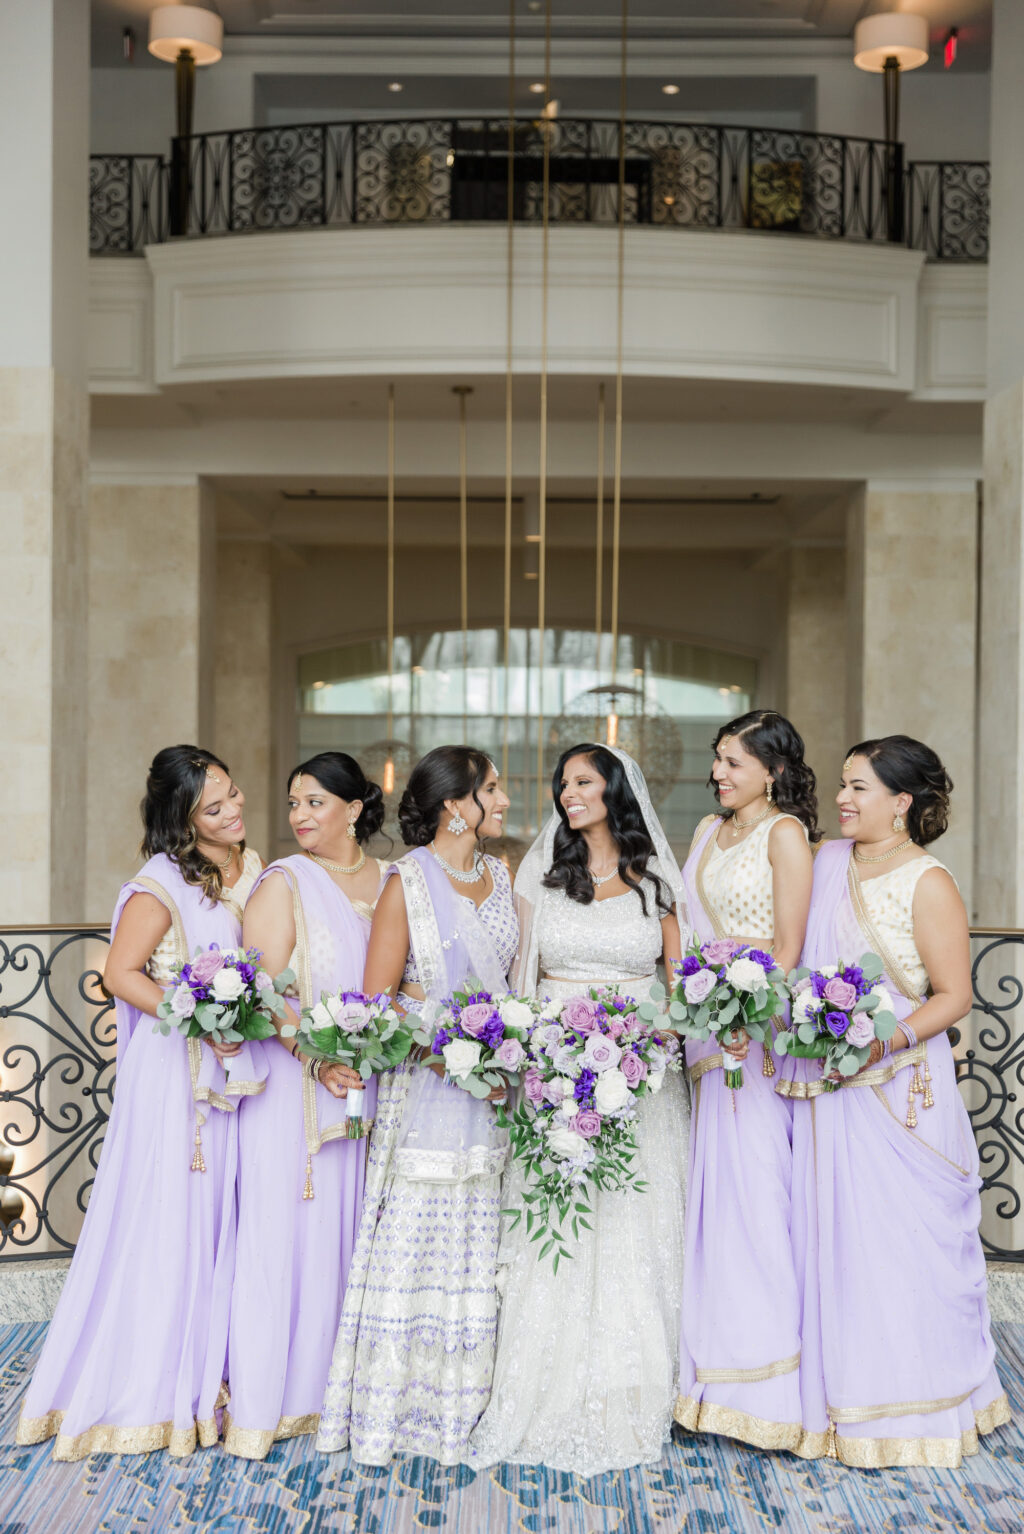 Lavender Purple, Gold, and White Indian Bridesmaids Sarees Indian Wedding Inspiration | Tampa Bay Hair and Makeup Artist Michele Renee The Studio